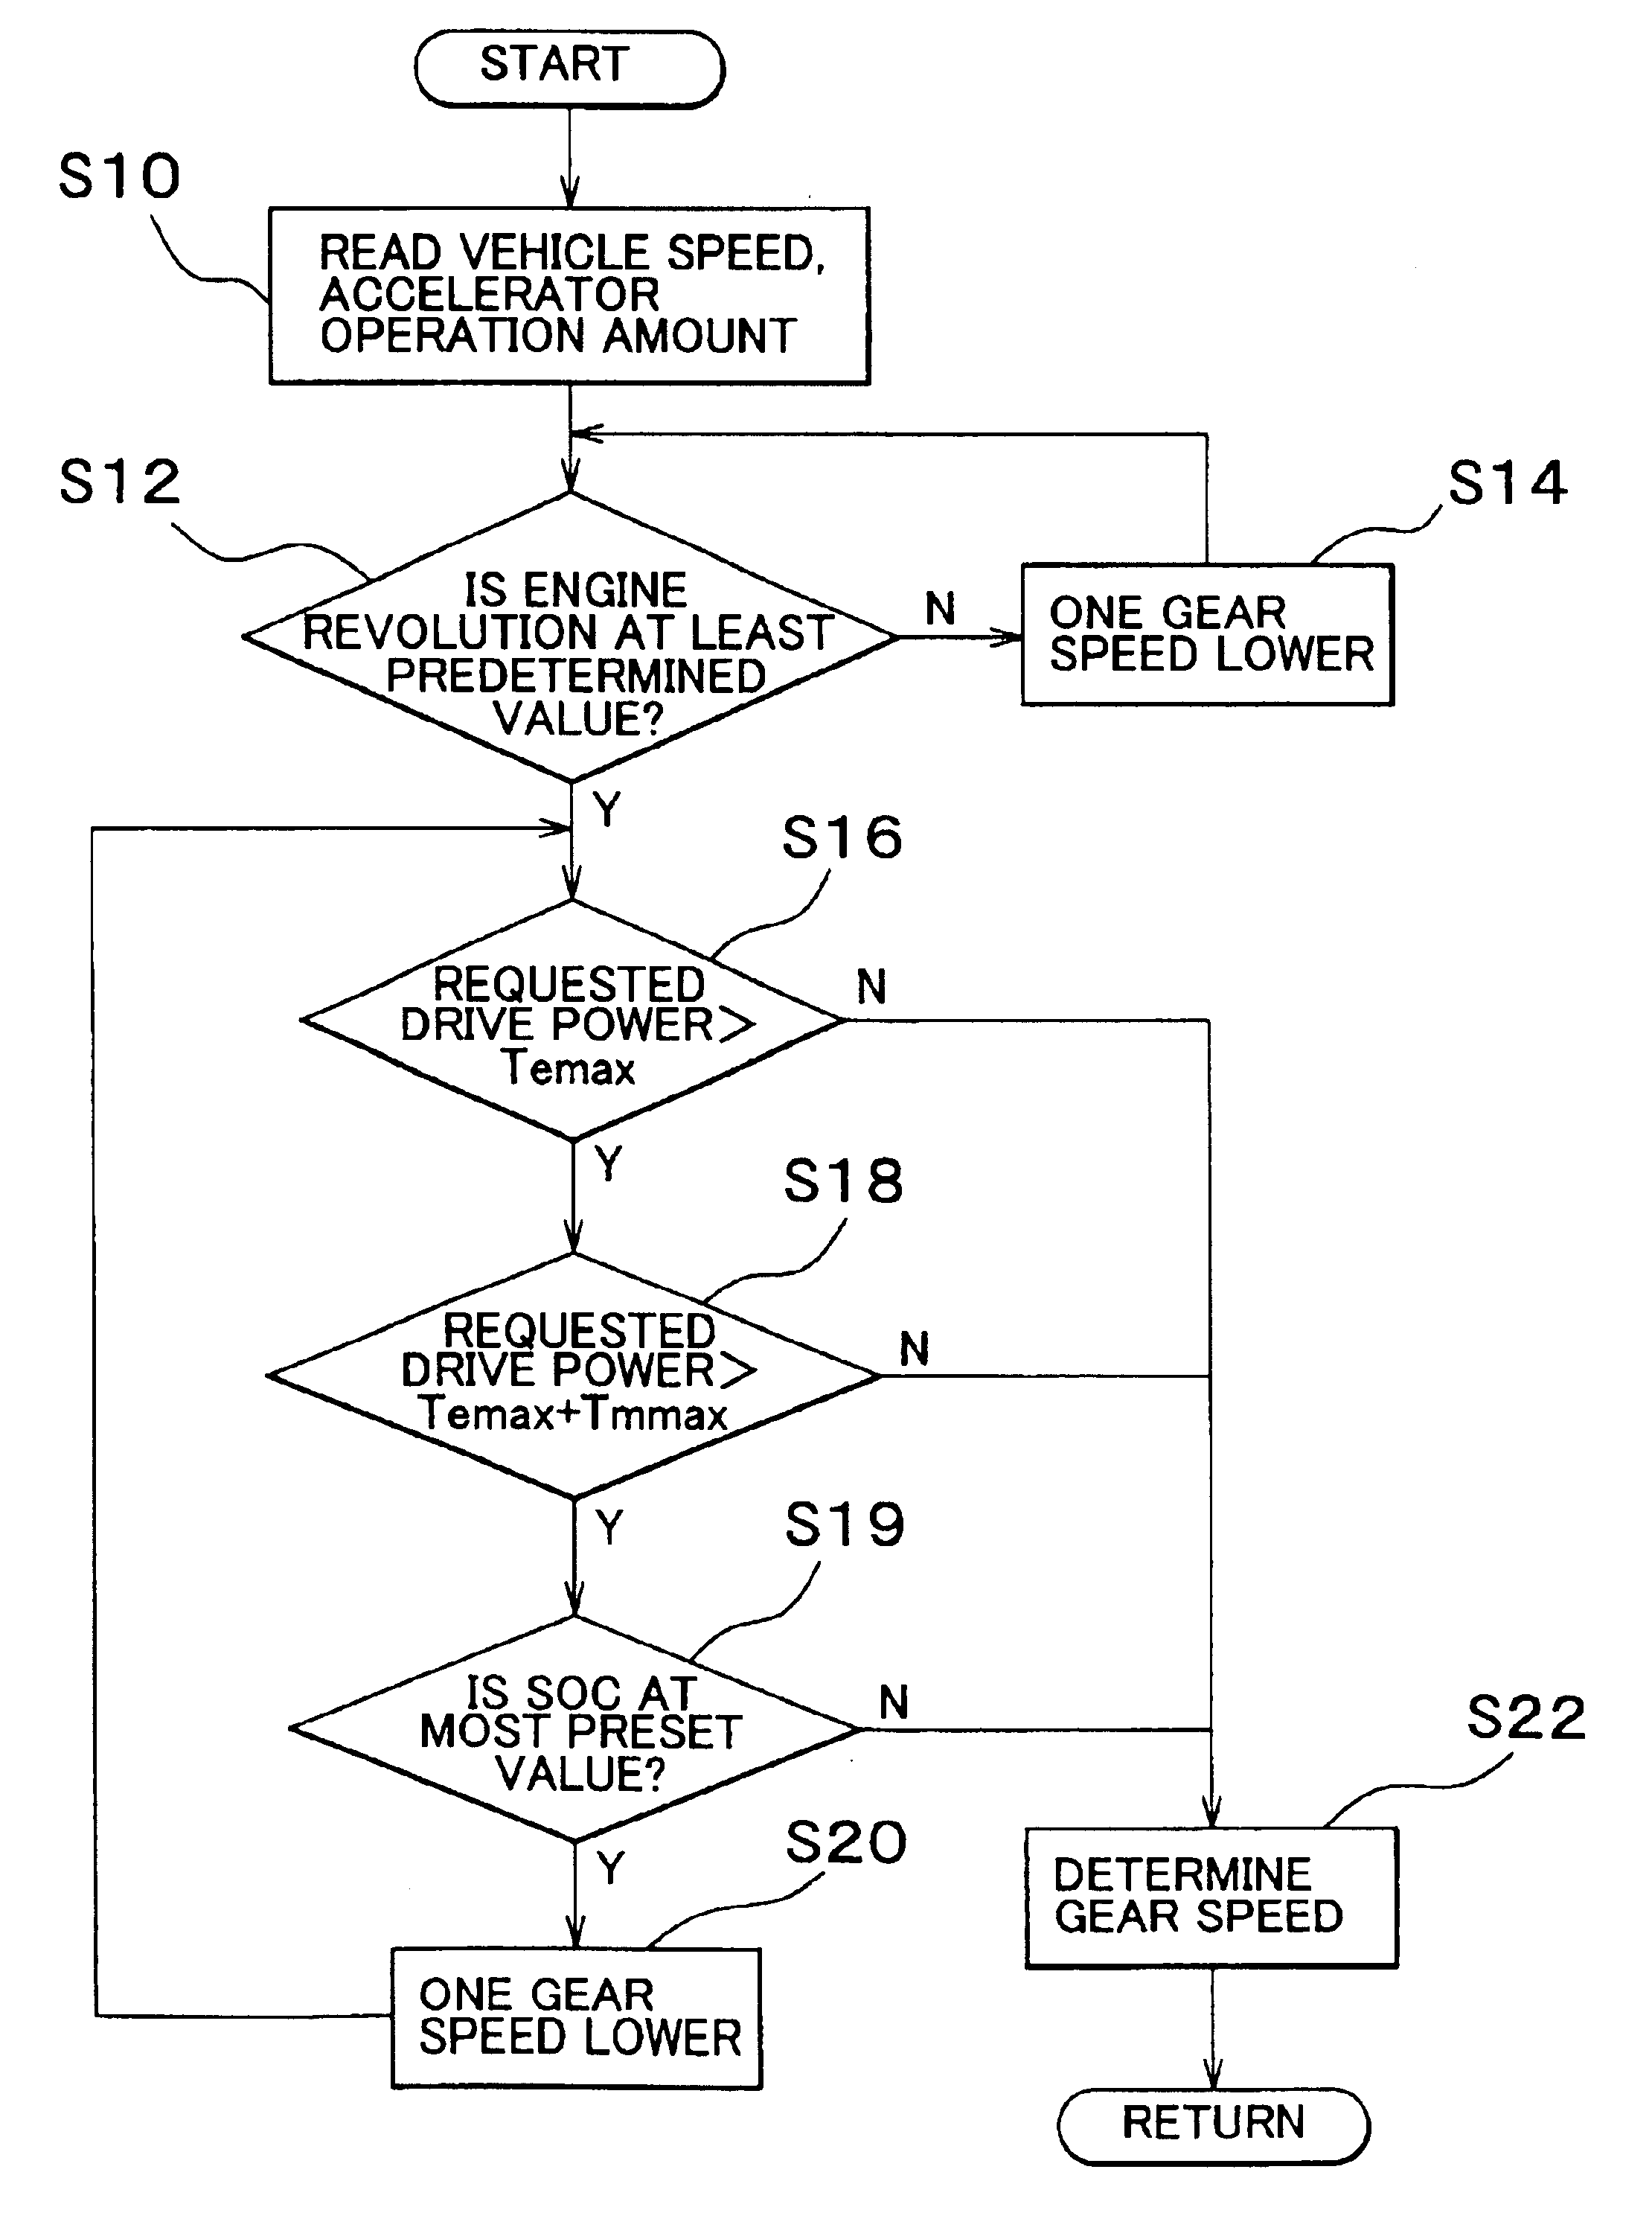 Control apparatus for transmission-equipped hybrid vehicle, and control method for the same